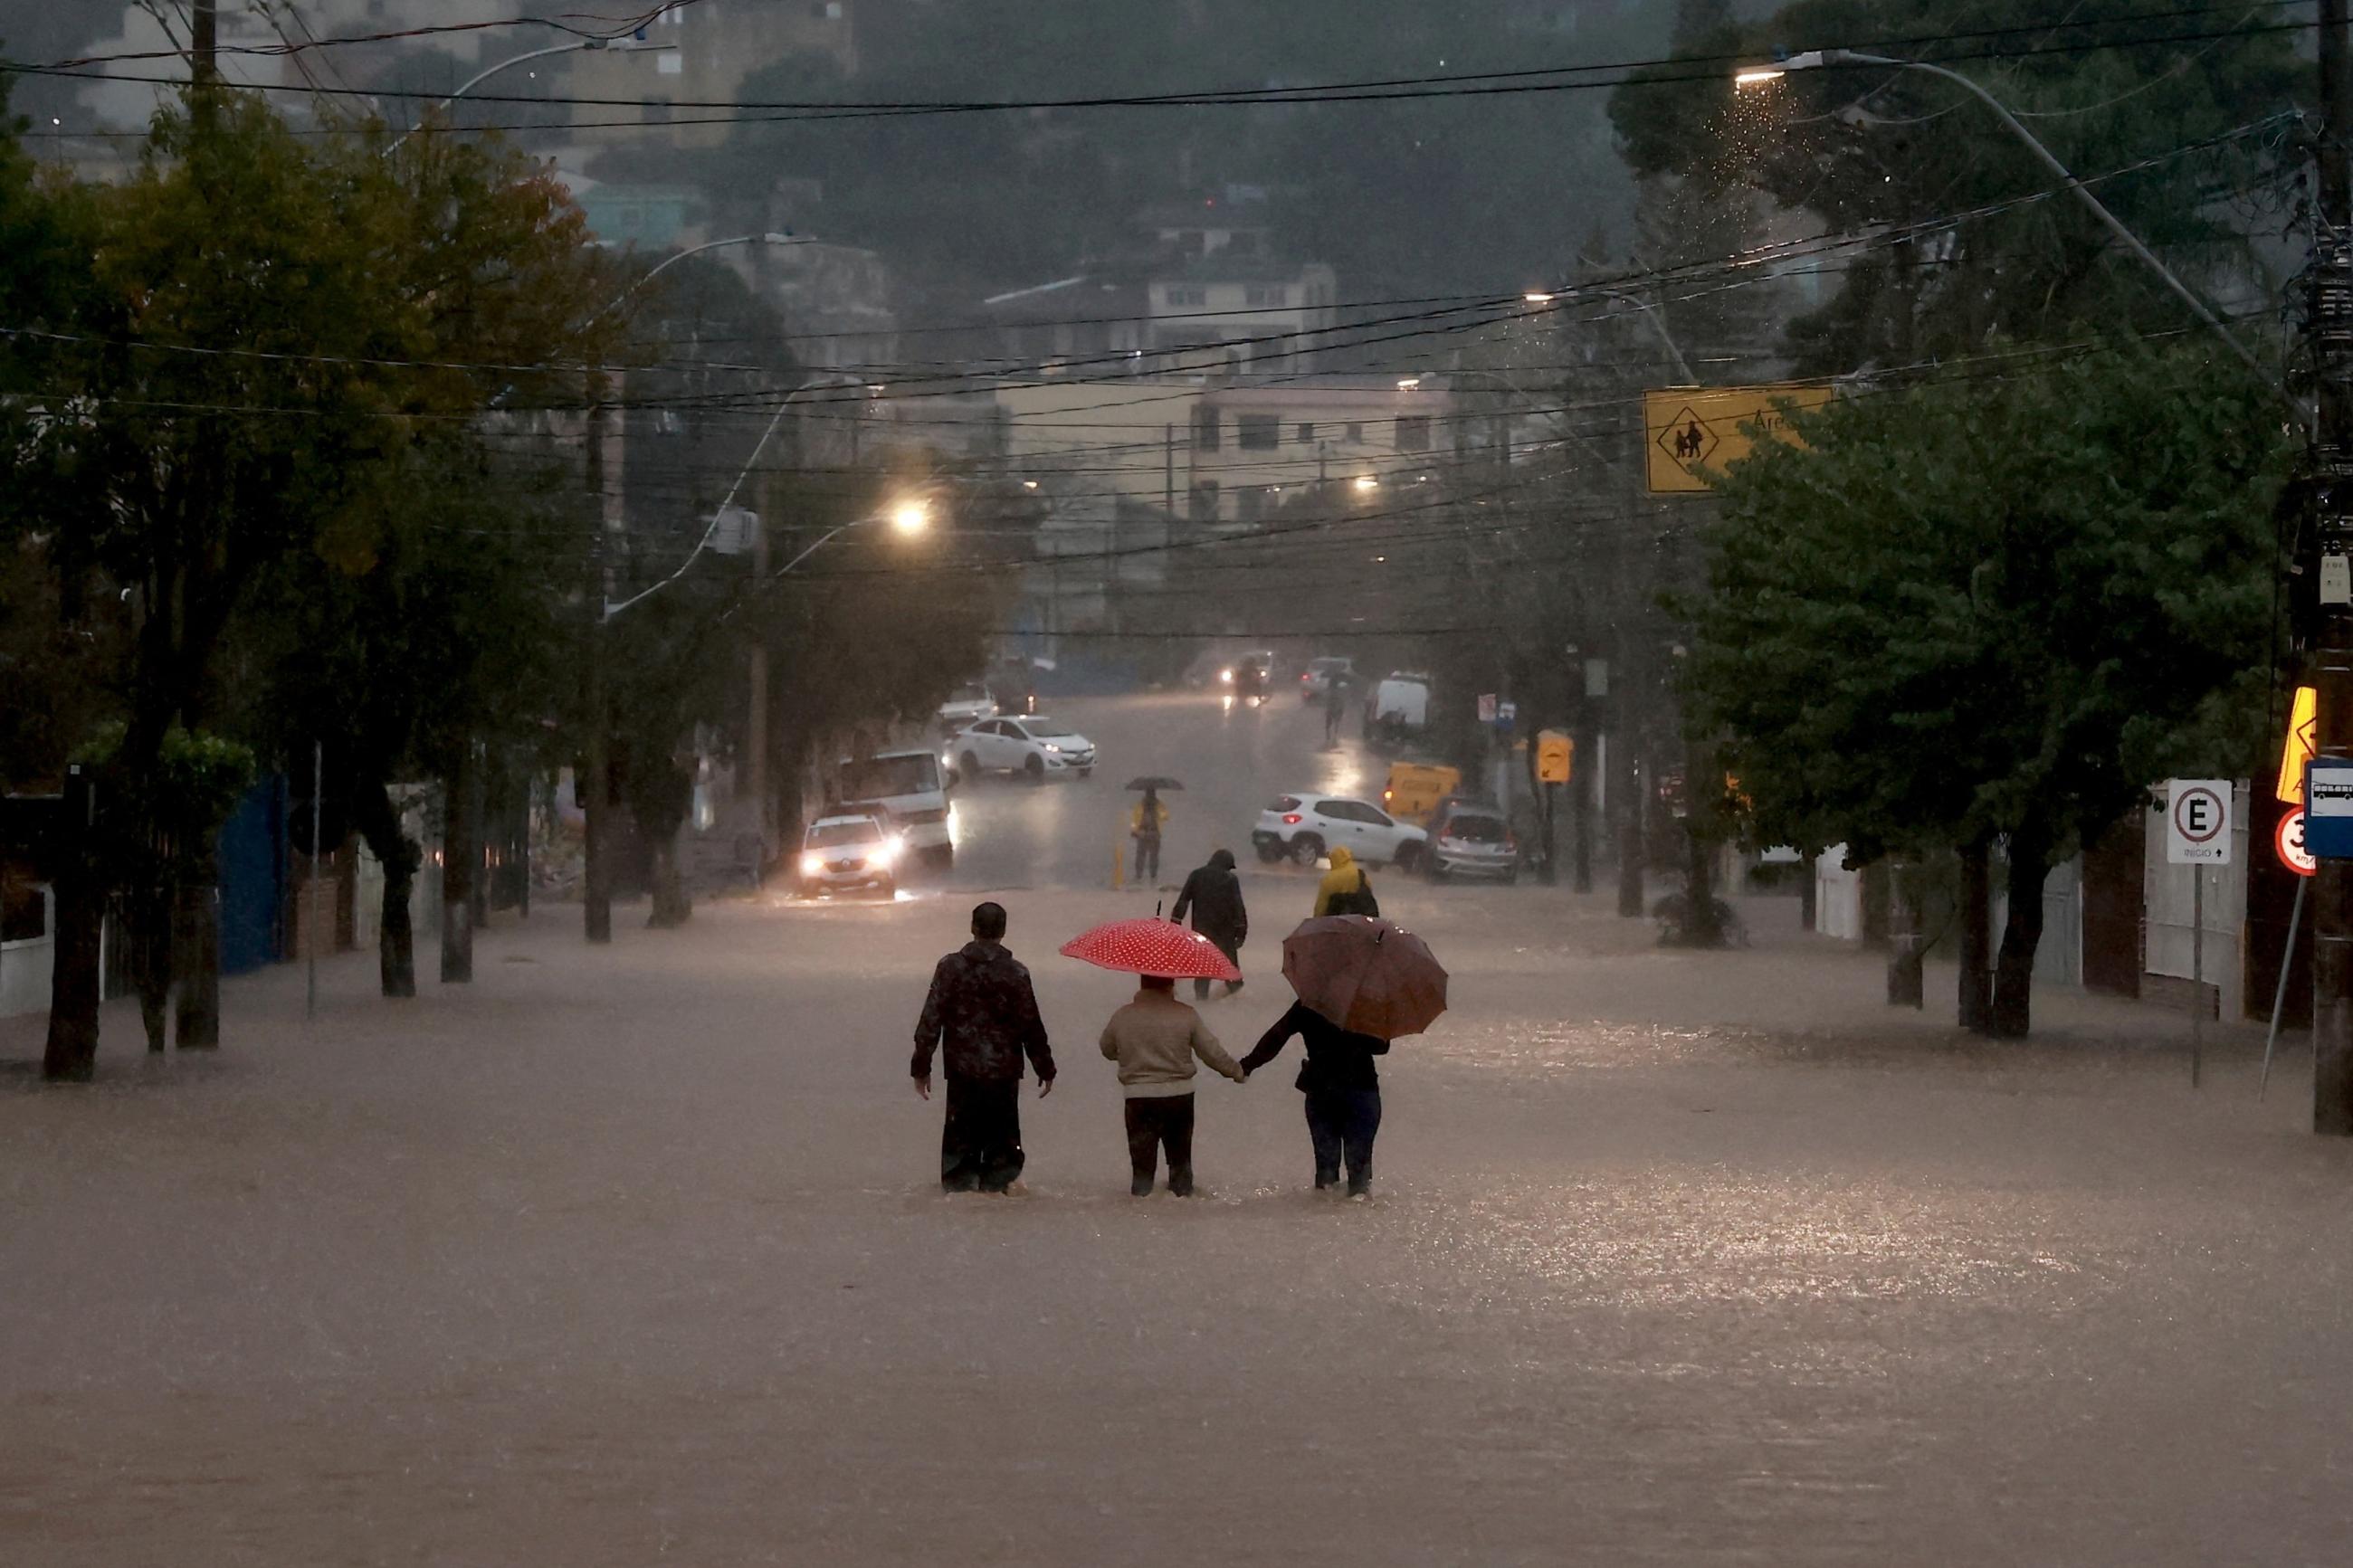 People walk in a flooded area in the Cavalhada neighborhood after heavy rains.